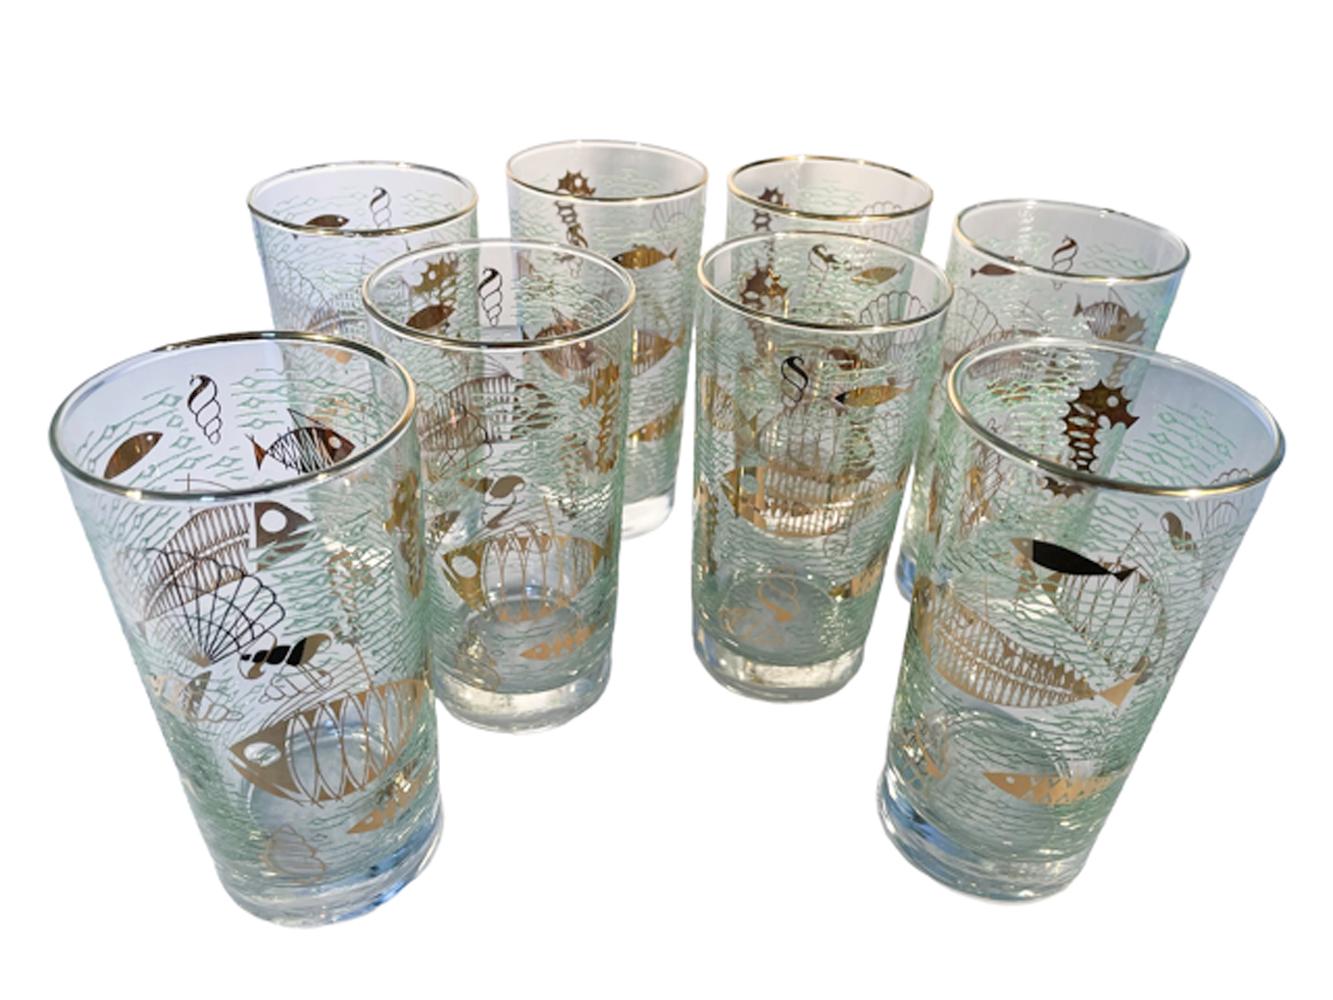 Set of 8 Libbey glass highball glasses in the 'Marine Life' pattern having atomic design fish in 22k gold on a ground of raised translucent green 'waves'. Libbey discontinued this pattern in 1959.